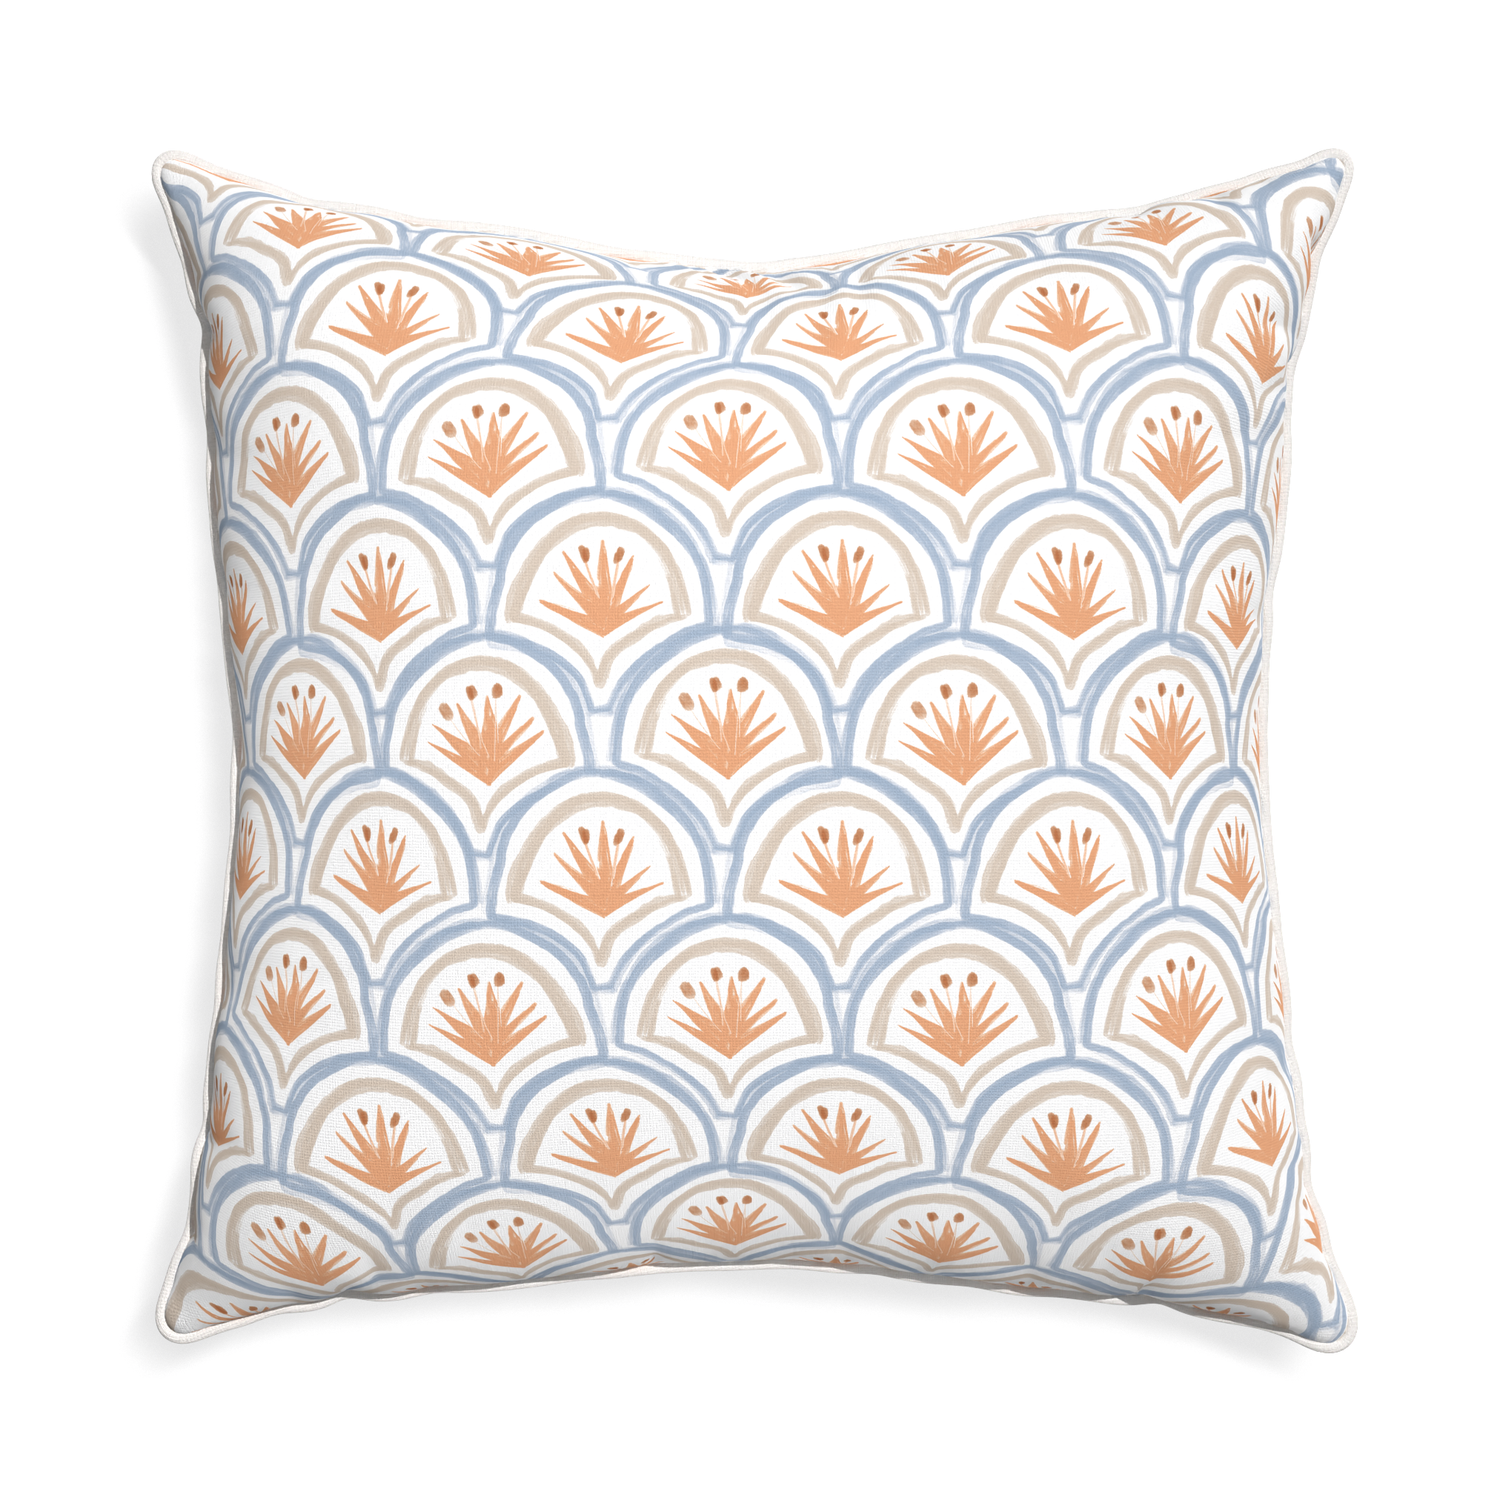 Euro-sham thatcher apricot custom art deco palm patternpillow with snow piping on white background